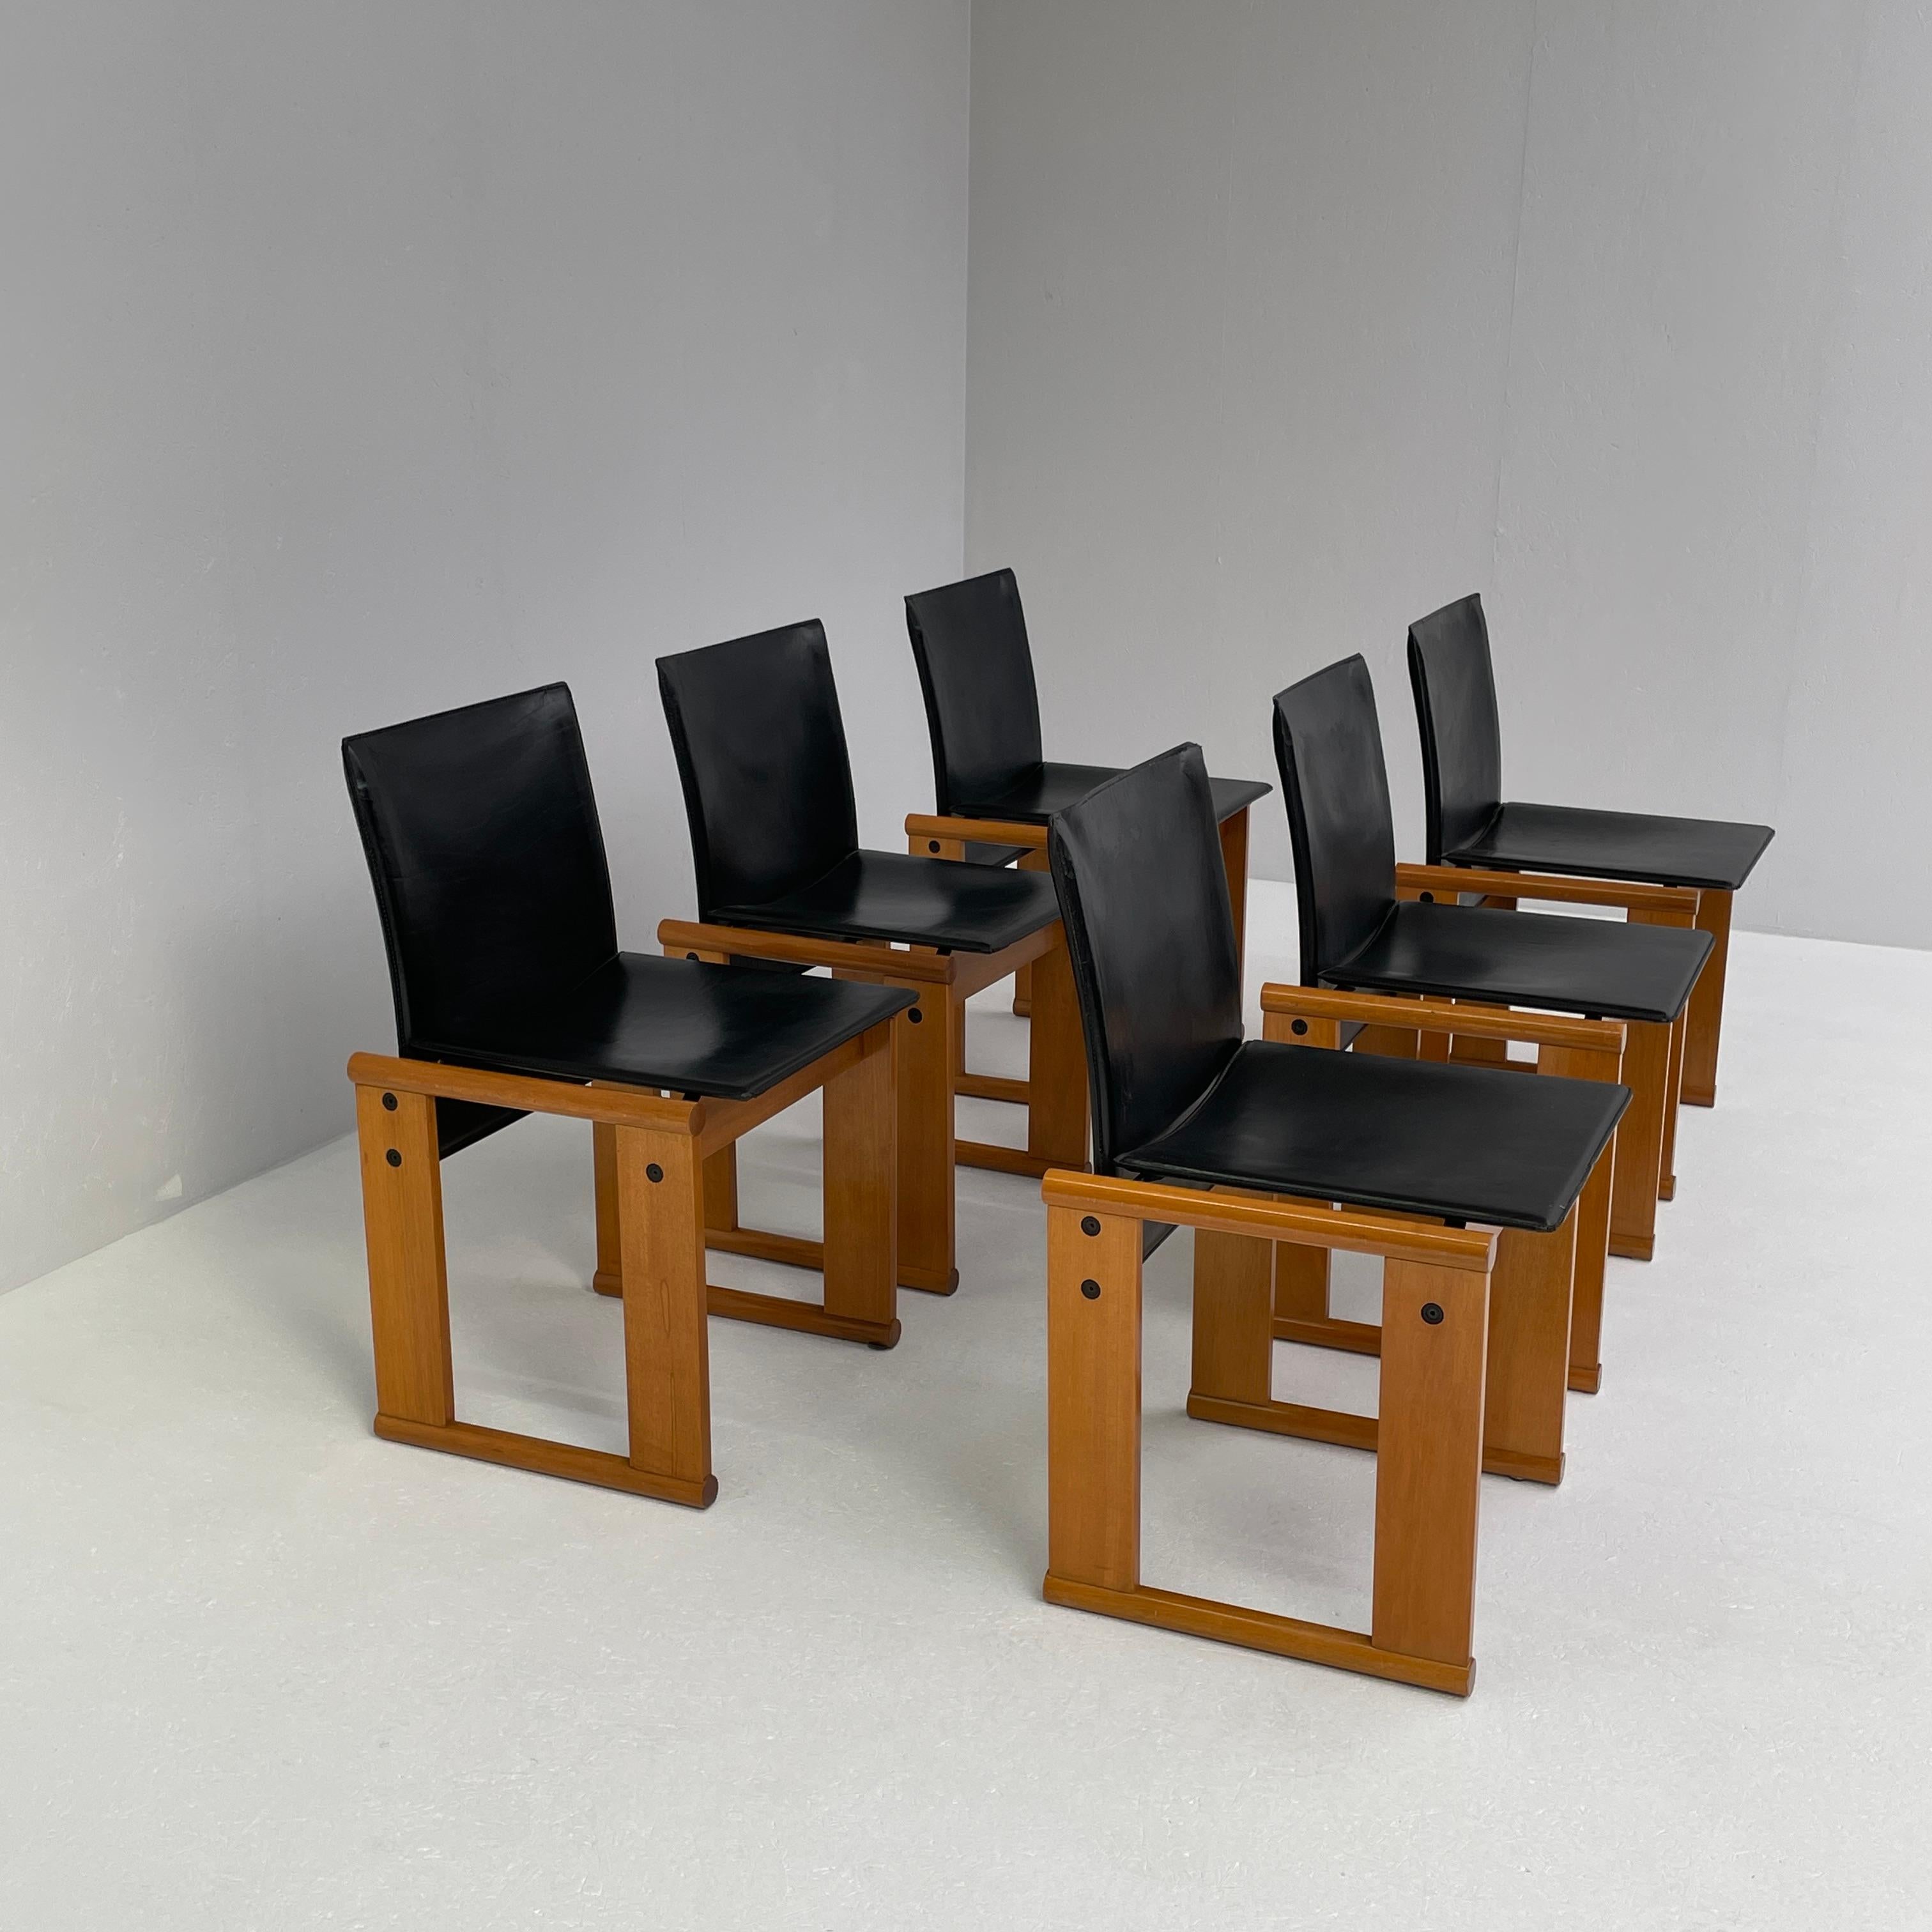 Set of 6 Monk chairs by Afra & Tobia Scarpa for Molteni, in black leather In Good Condition For Sale In Antwerpen, BE